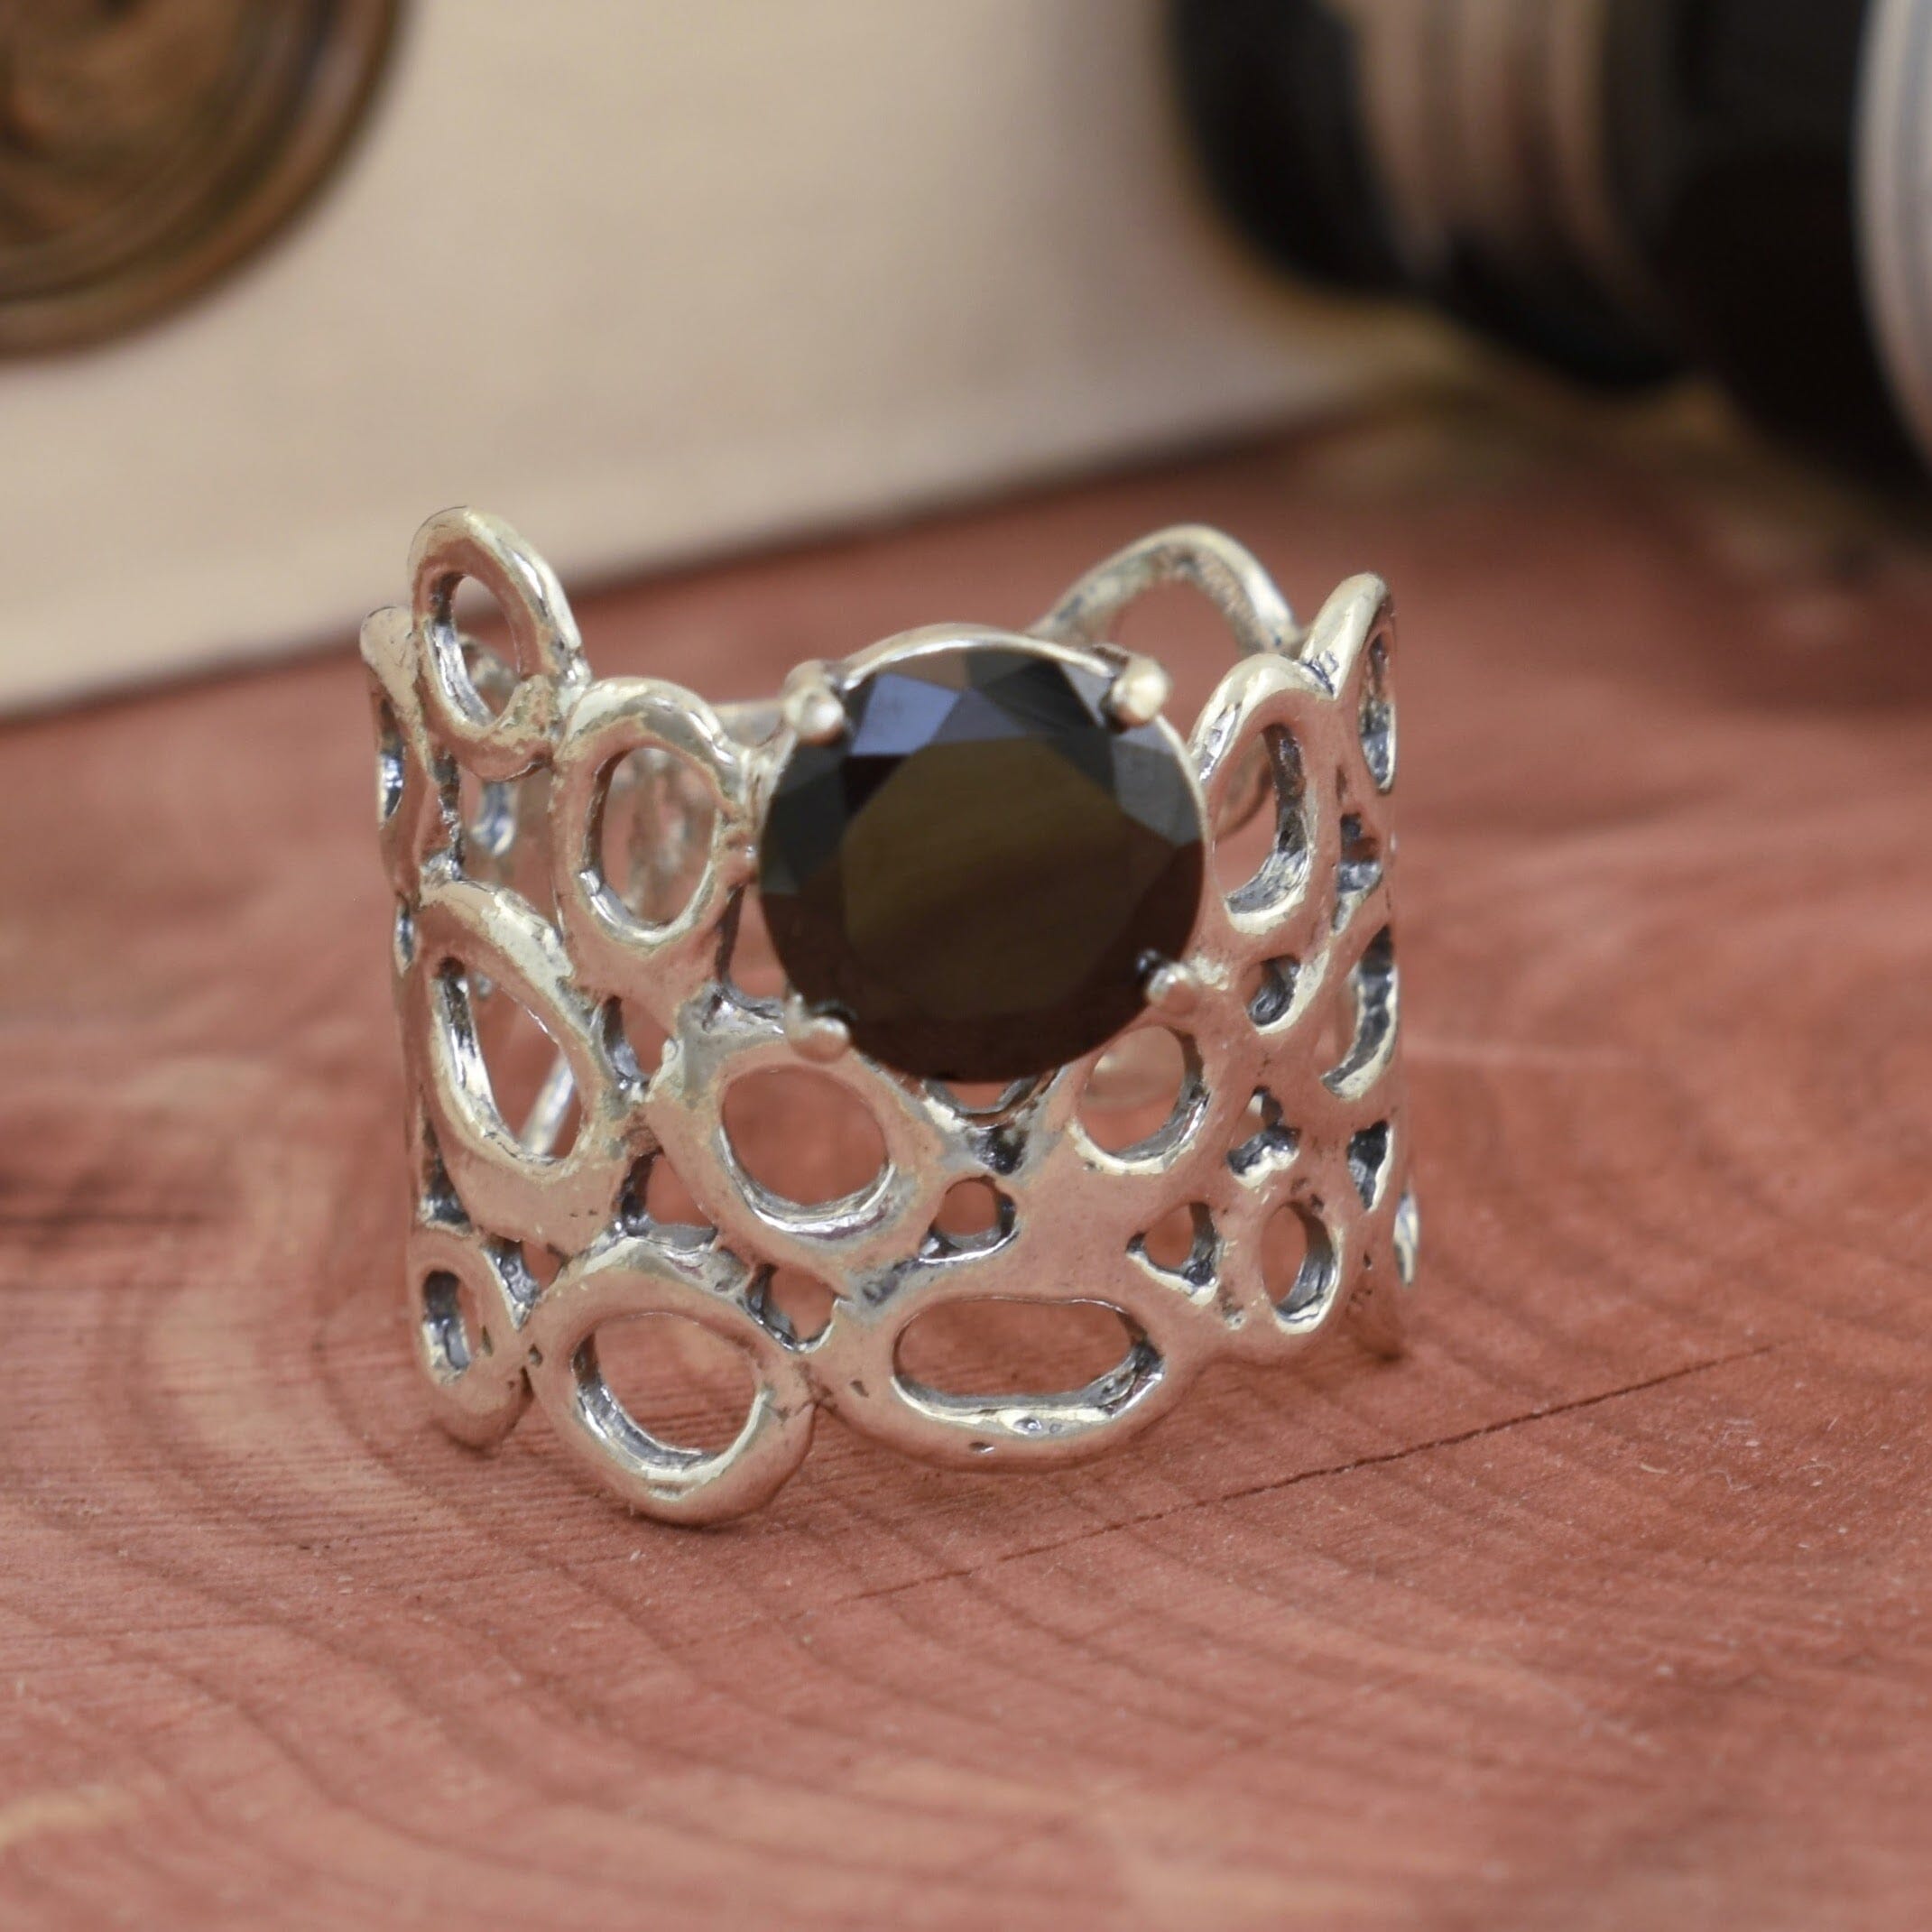 Handcrafted sterling silver ring with round black cubic zirconia stone